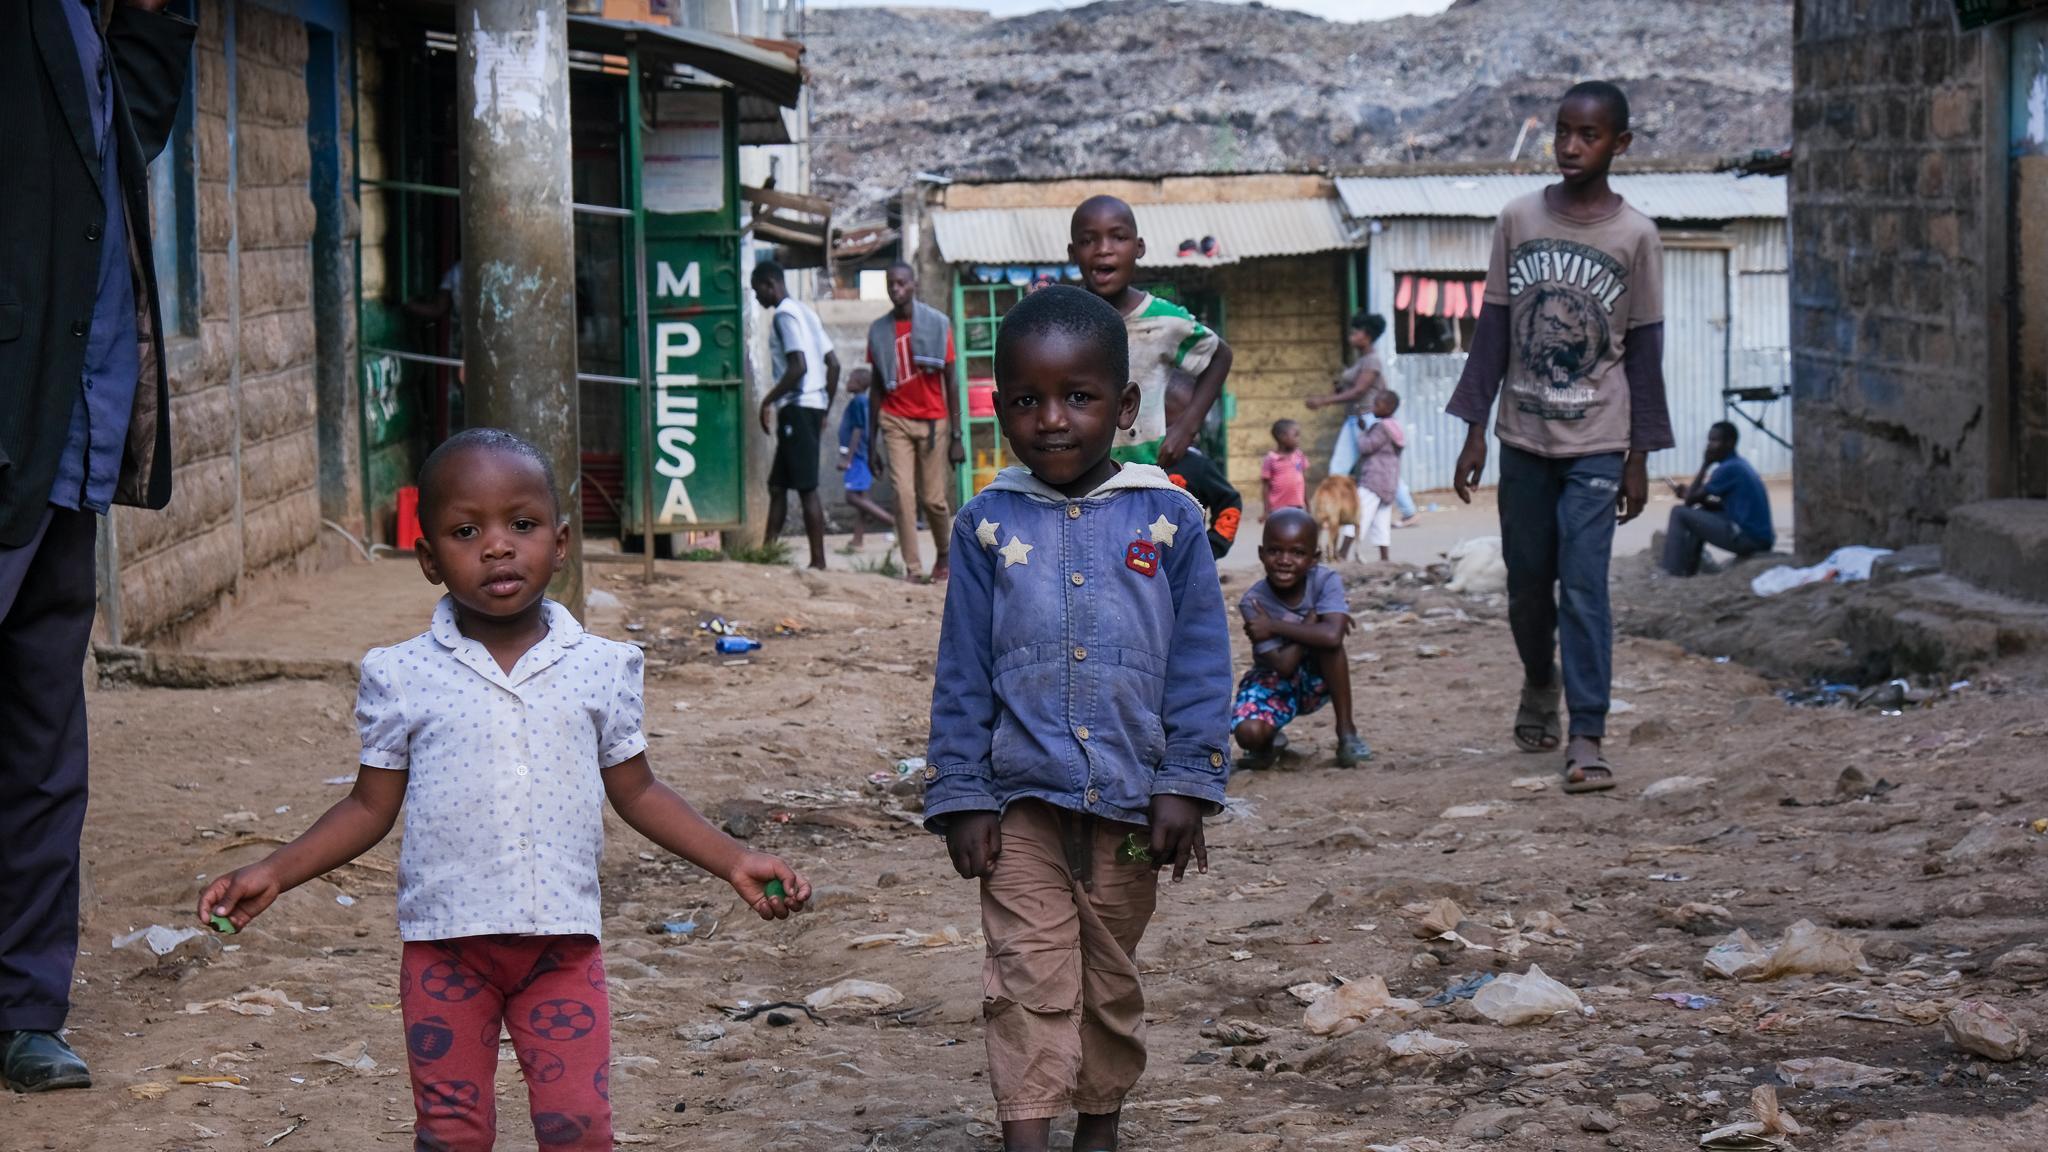 Children in front of a pile of garbage in Korogocho